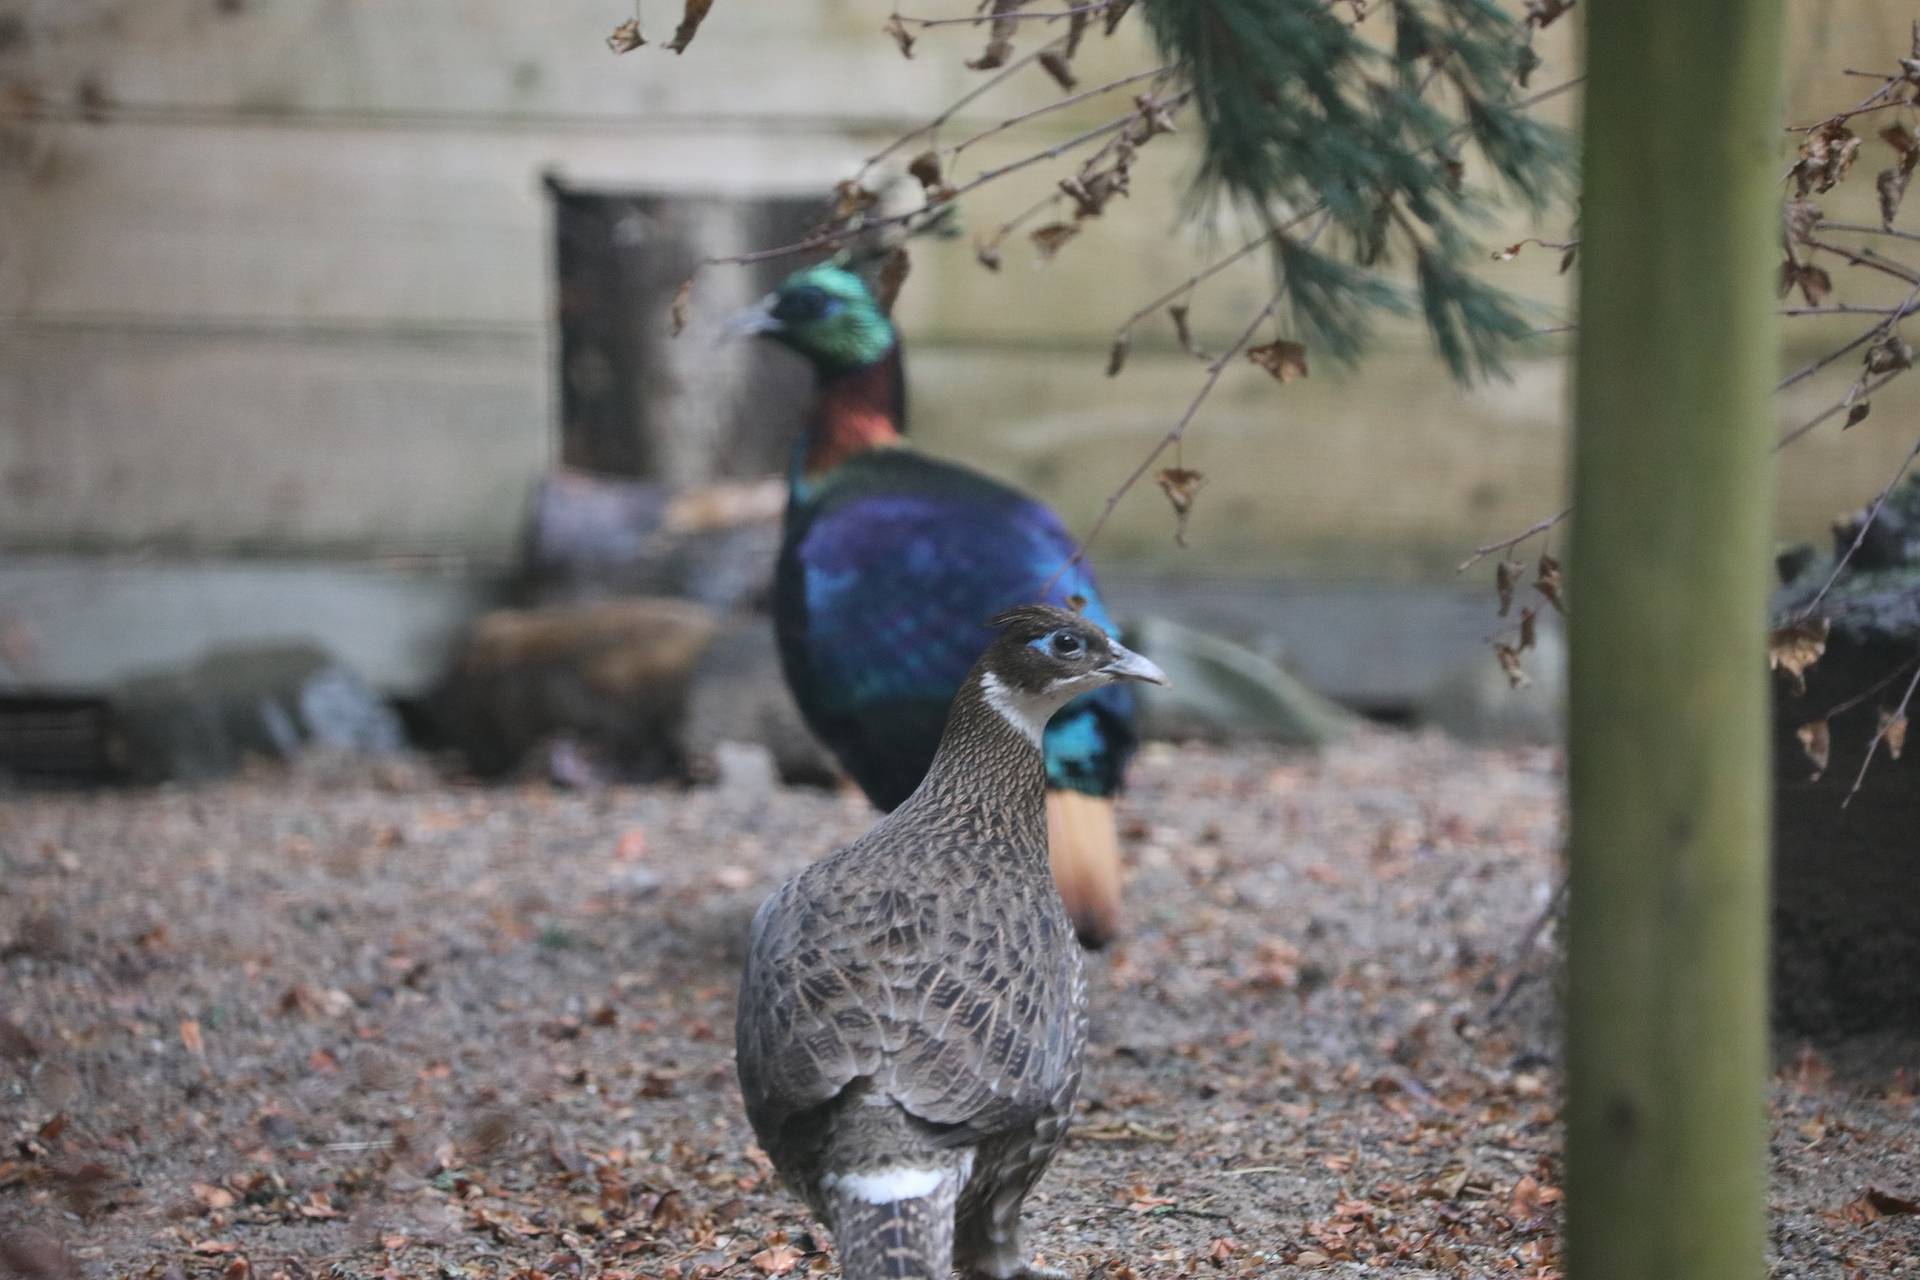 A male and female Himalayan monal. The male is brightly coloured with blue feathers and standing further back from the muted female with grey and brown feathers IMAGE: Jessica Wise 2019